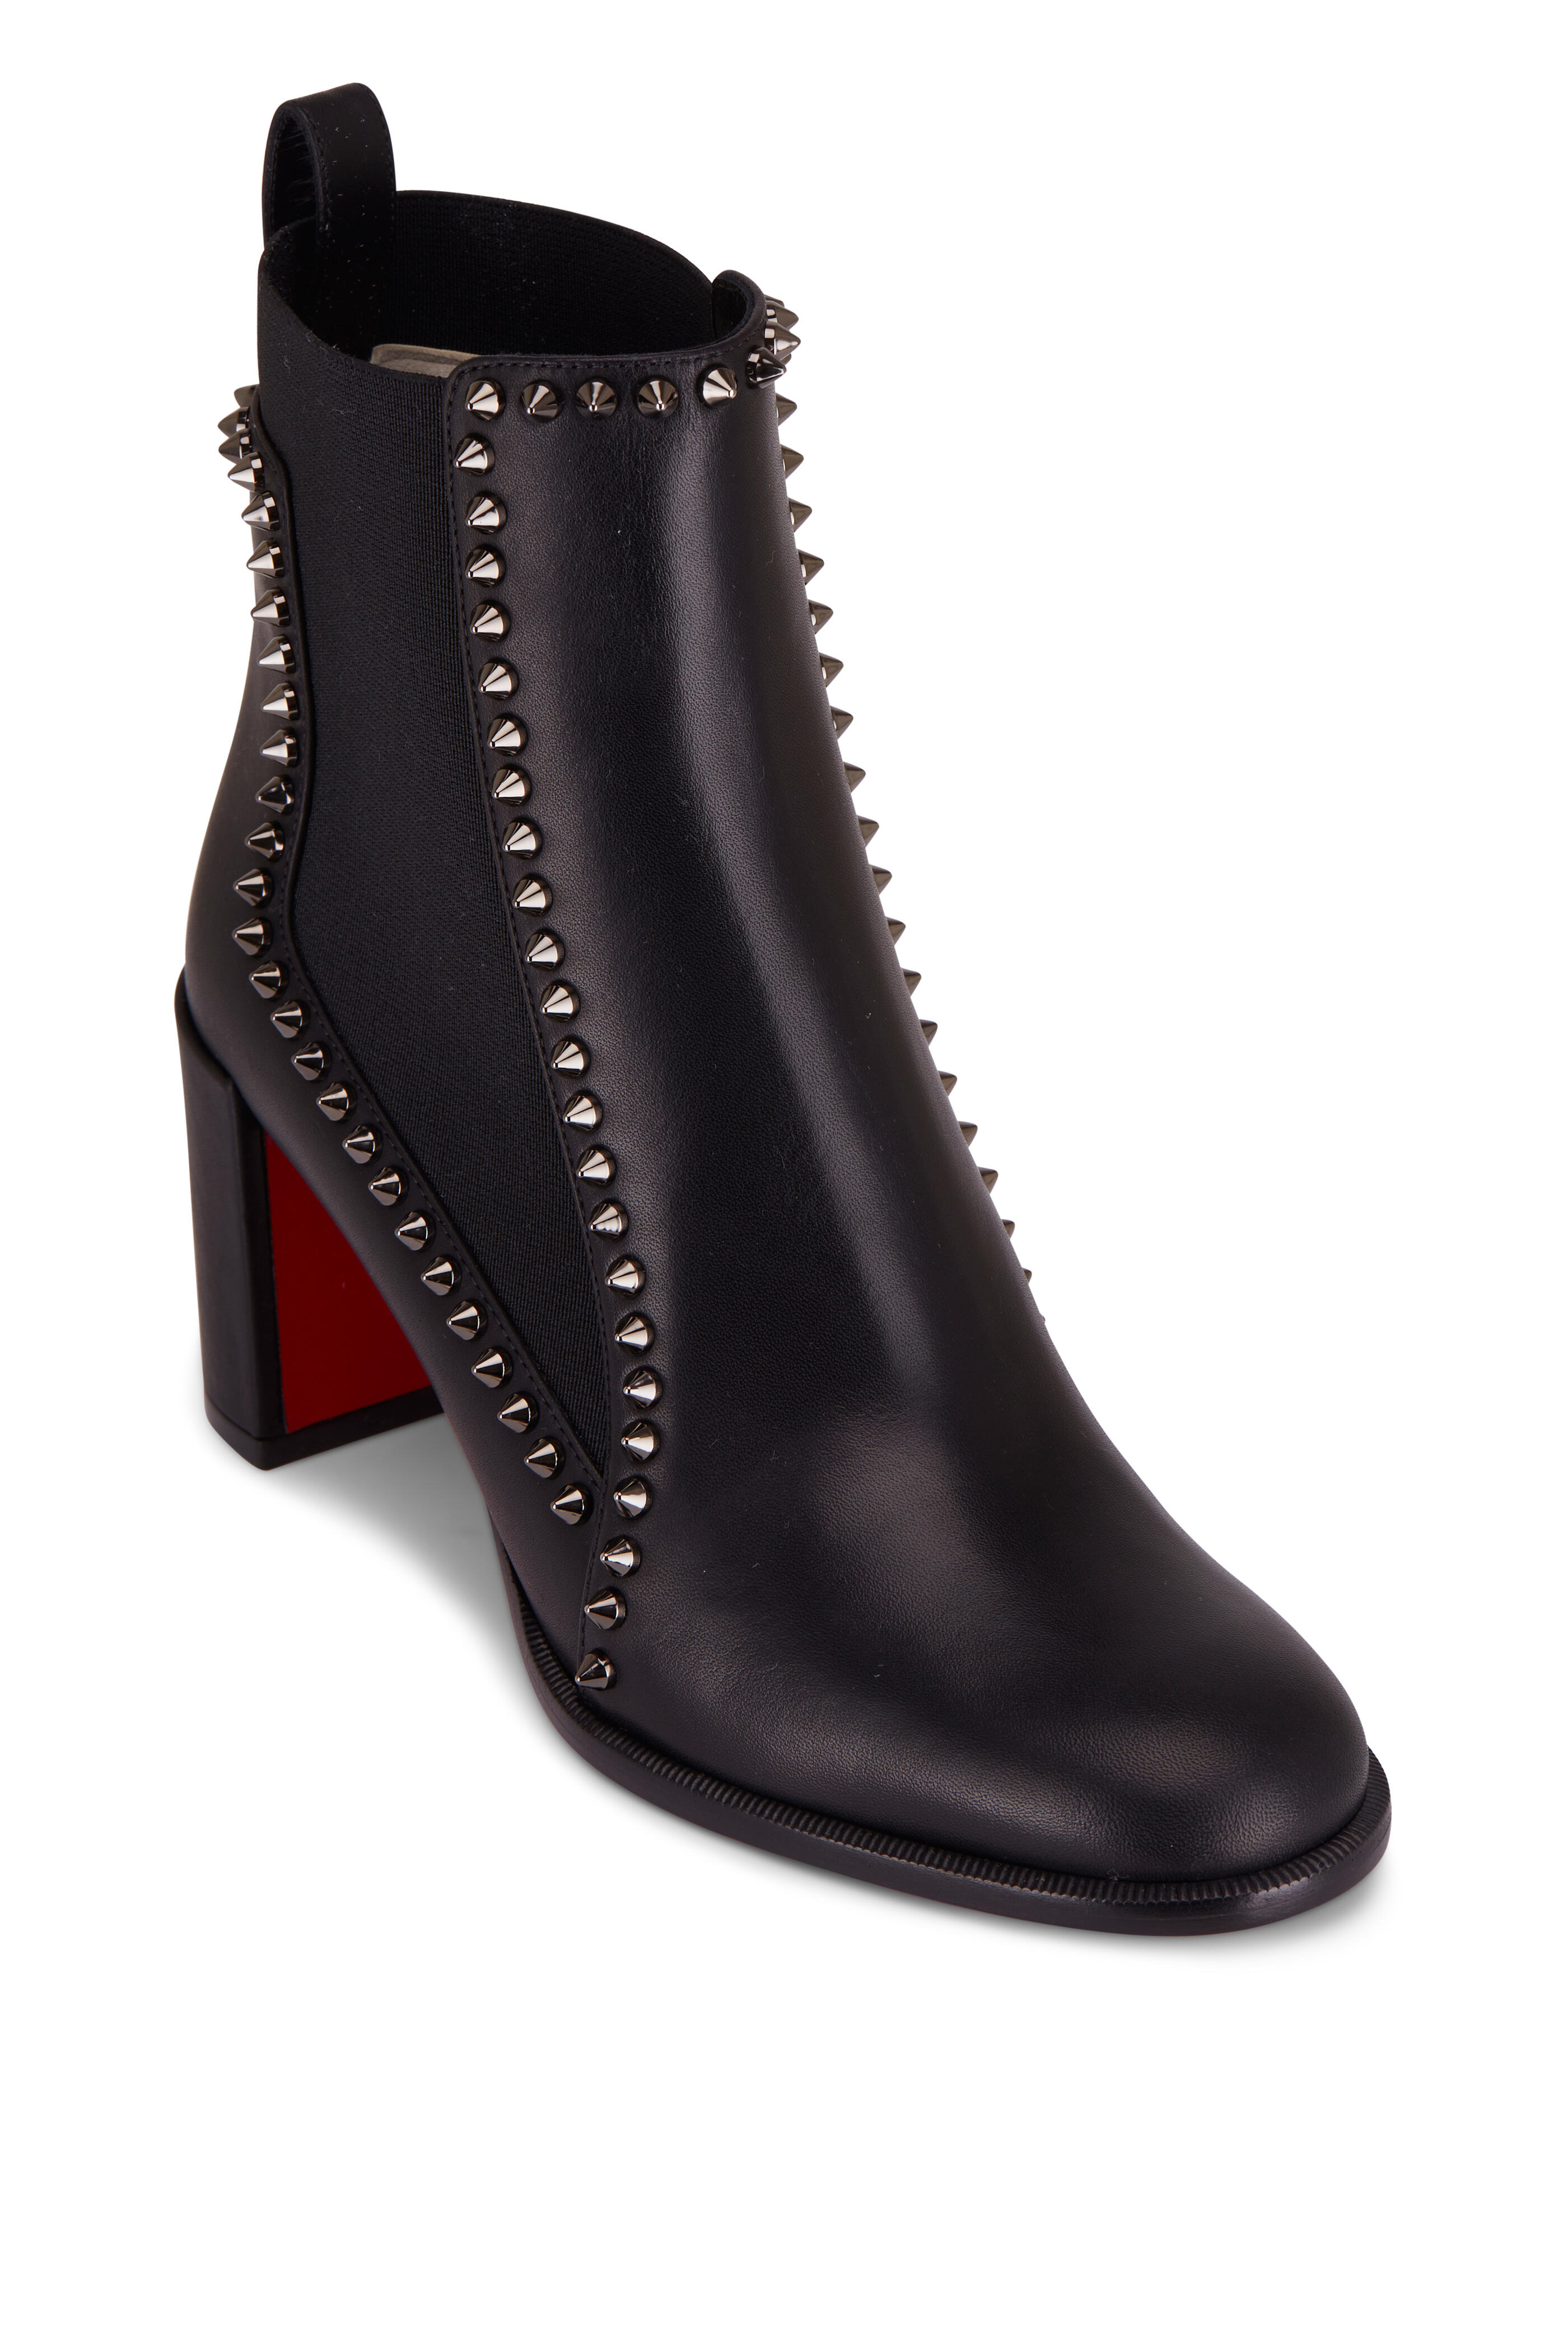 Louboutin - Outline Leather Spike Boot, 70mm